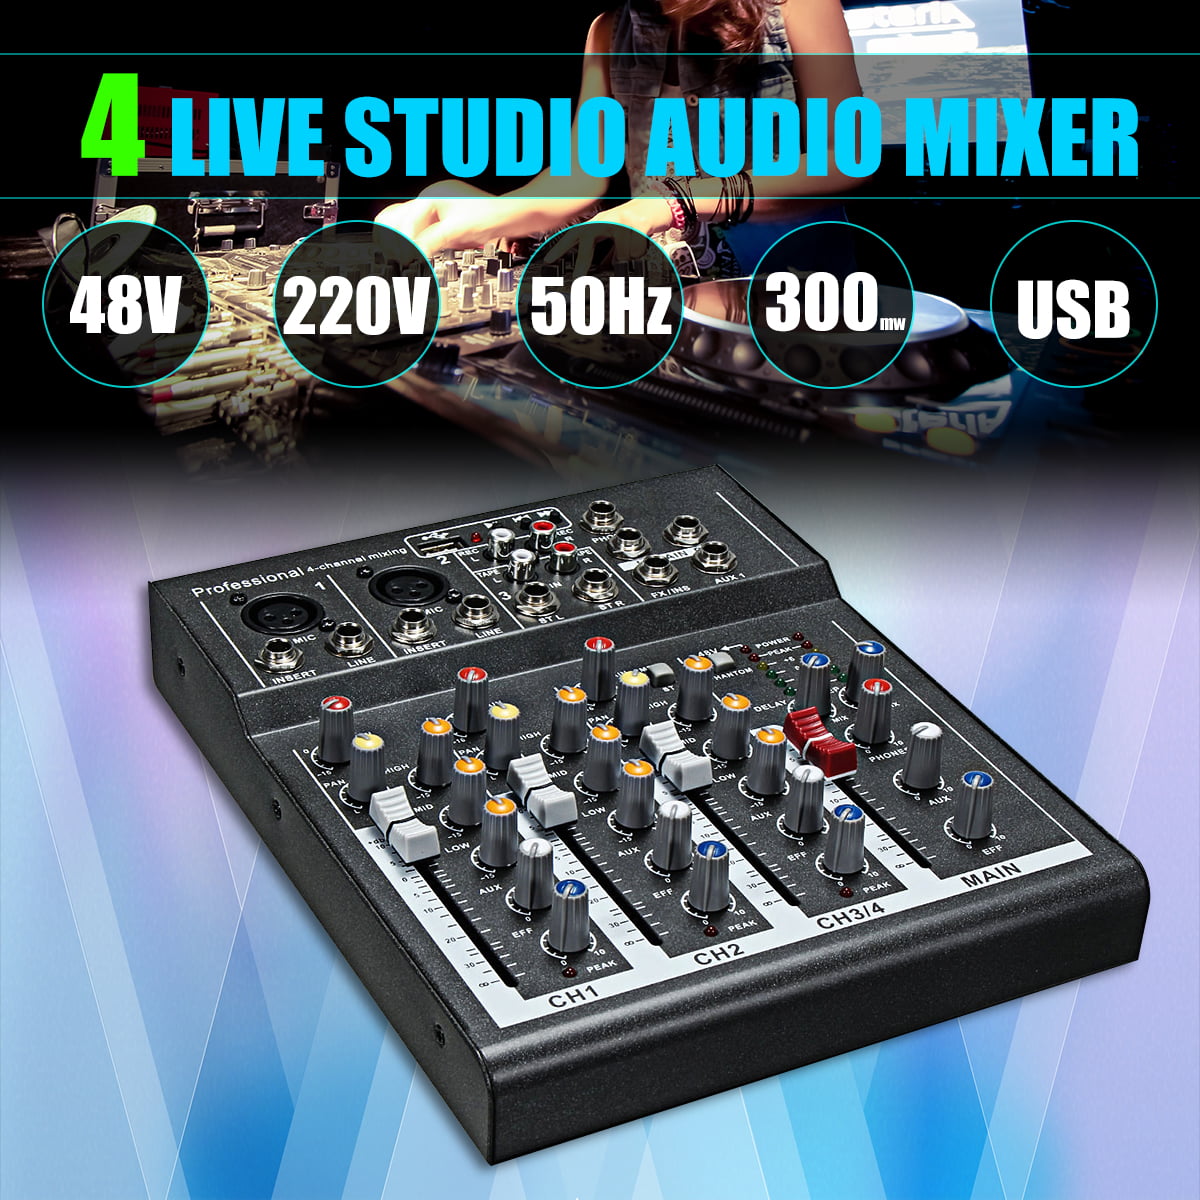 Professional Audio Mixer,Portable DJ Sound Mixing Console System Interface 6 Channel USB/MP3 Bluetooth Computer Input 48V Phantom Power Stereo L/R Input for Recording,Streaming,Singing,Party KTV 